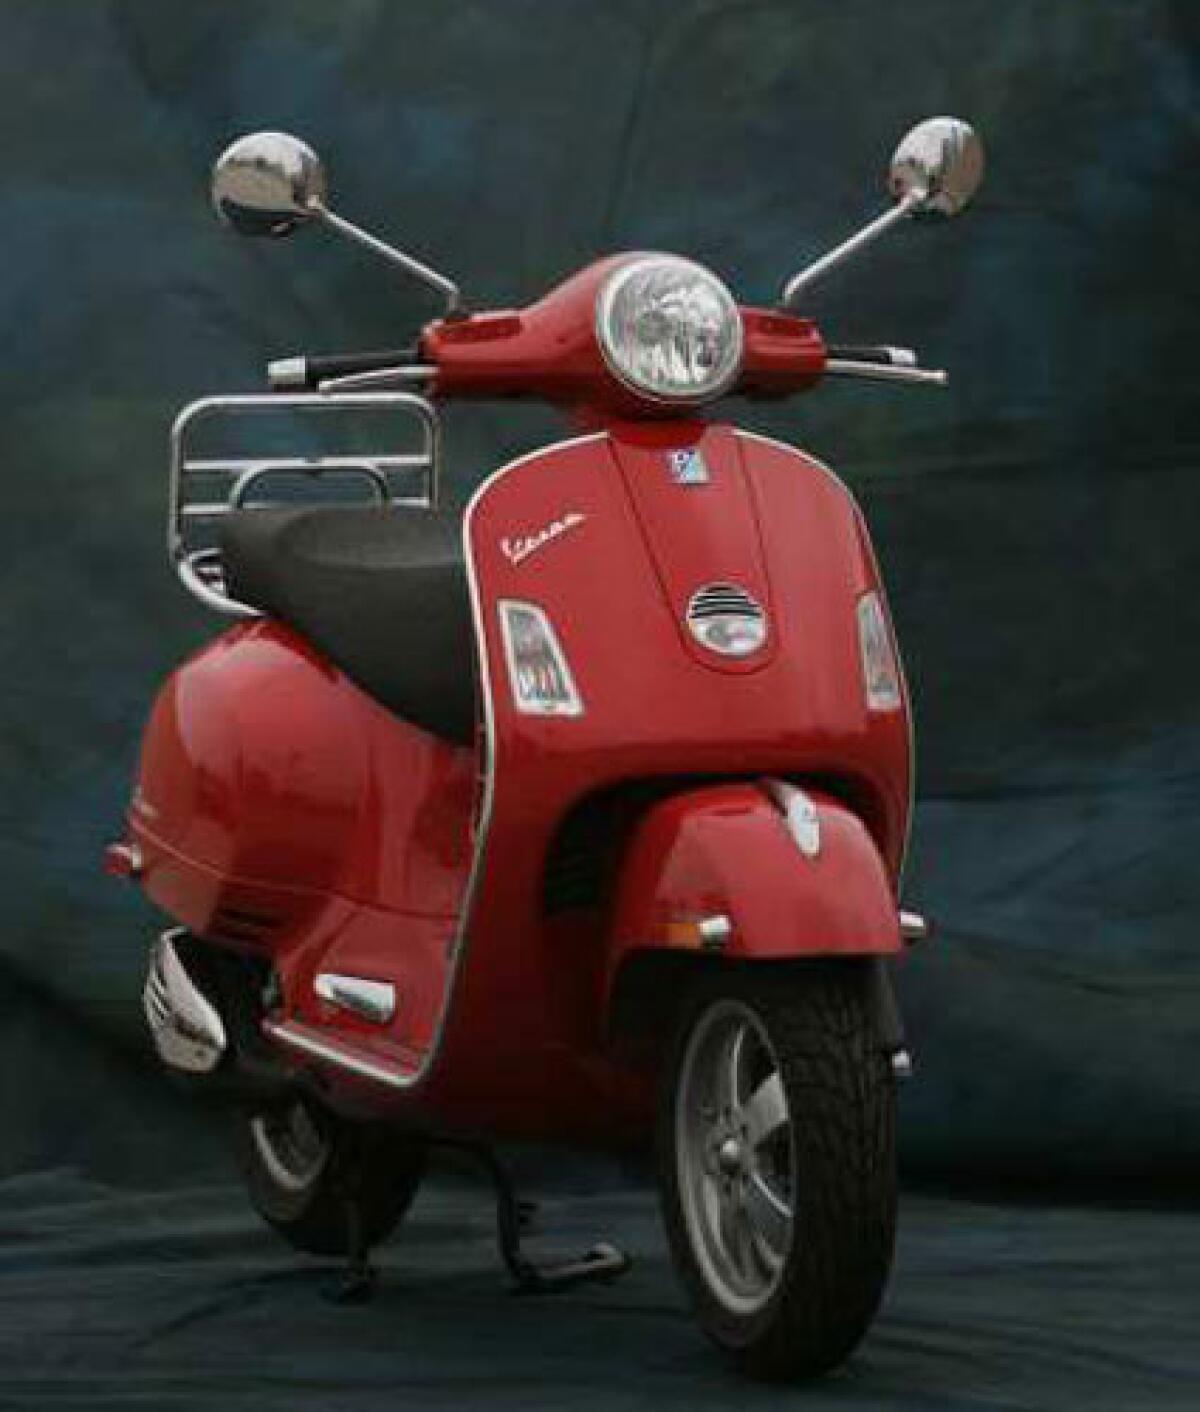 Sixty years since its inception, the elegant Vespa is still the gold standard of scooters.